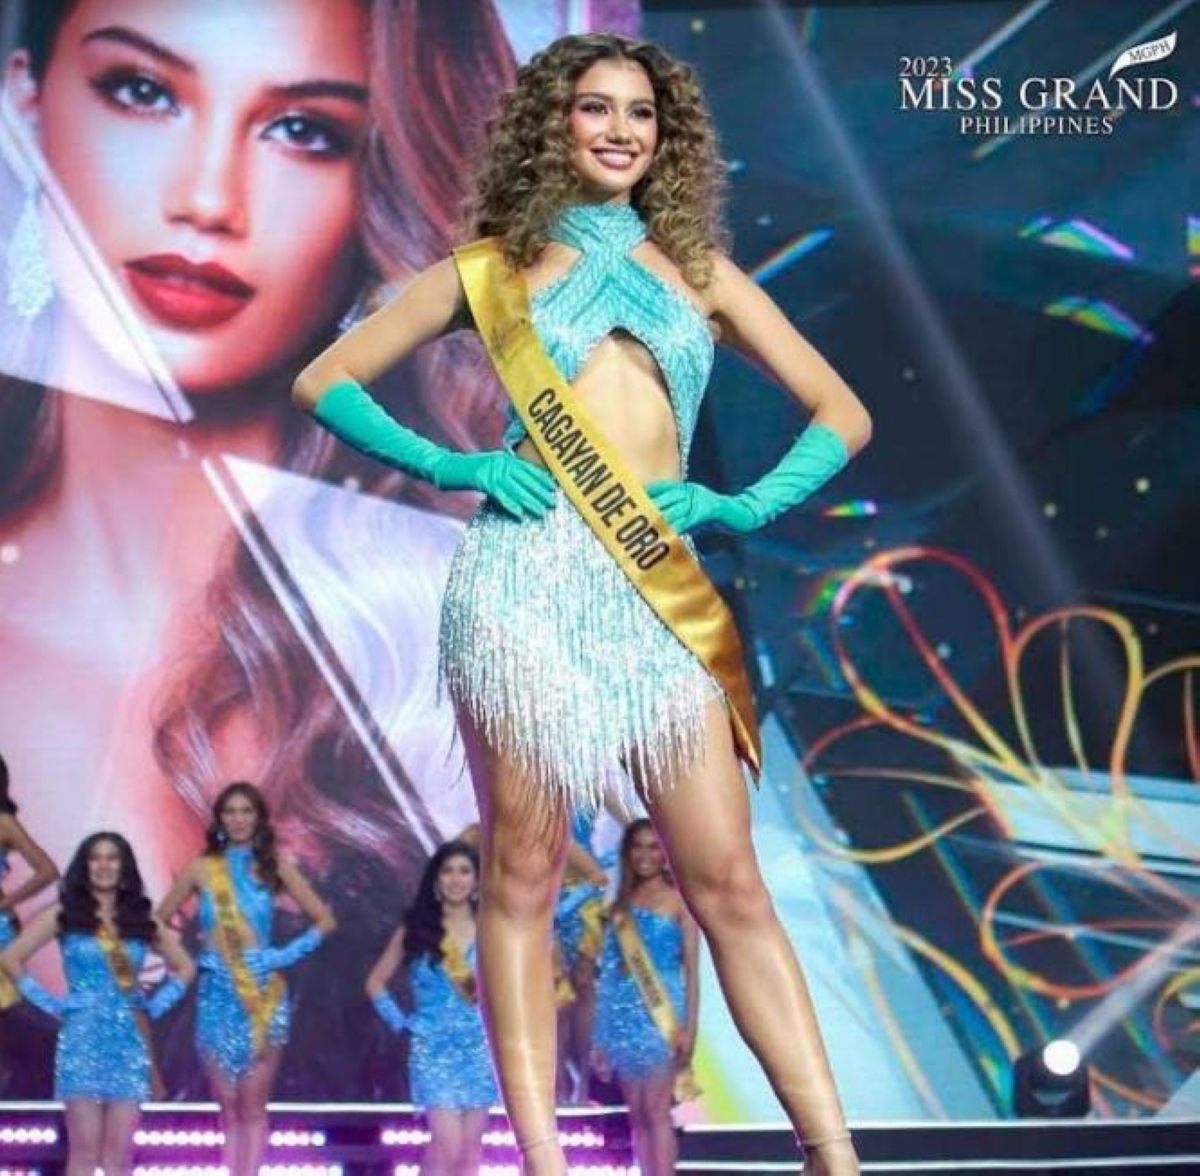 Cagayan de Oro candidate crowned Miss Grand Philippines 2023 The